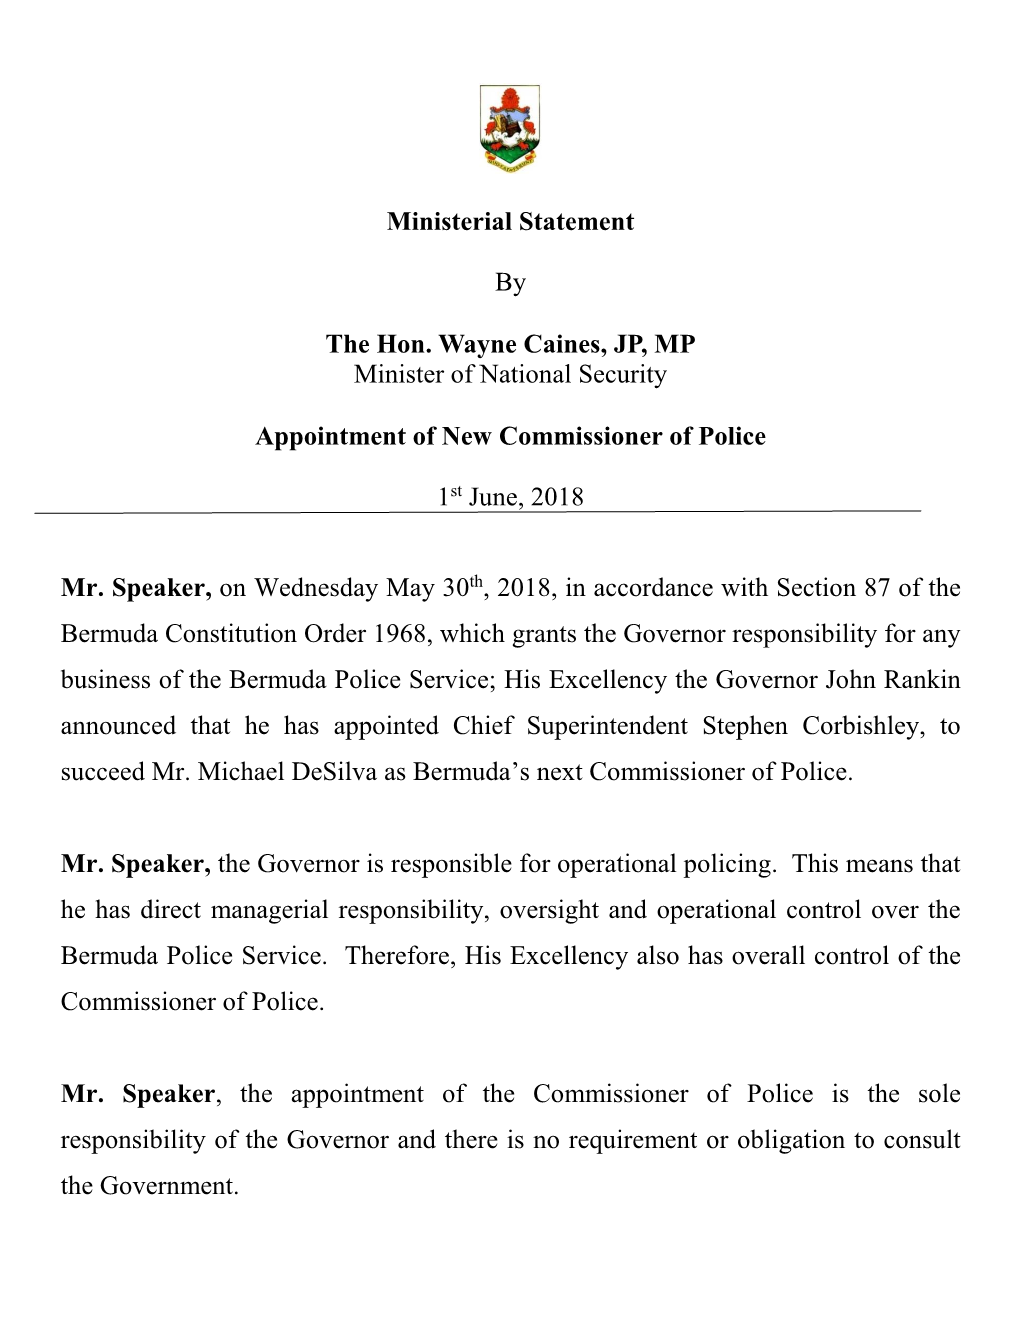 New Commissioner of Police